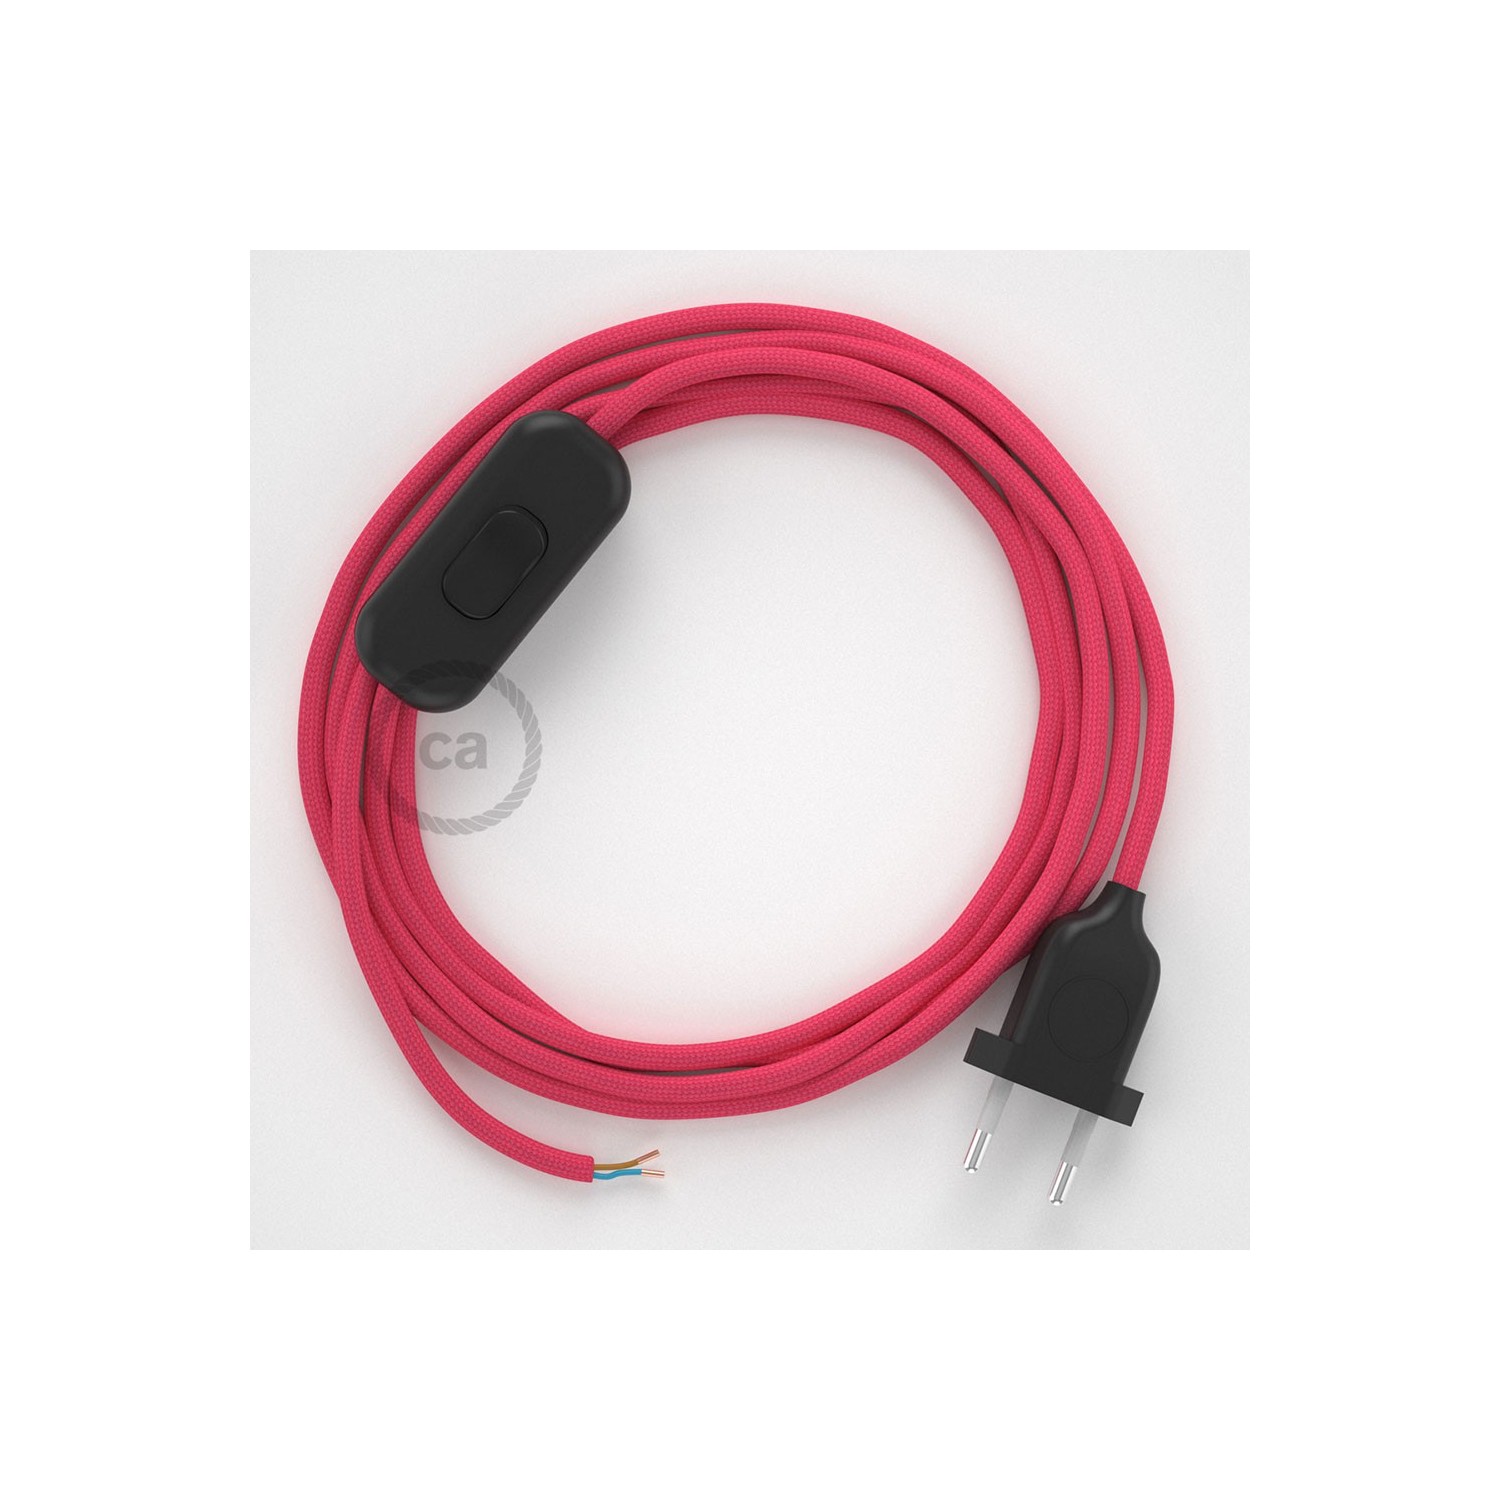 Lamp wiring, RM08 Fuchsia Rayon 1,80 m. Choose the colour of the switch and plug.